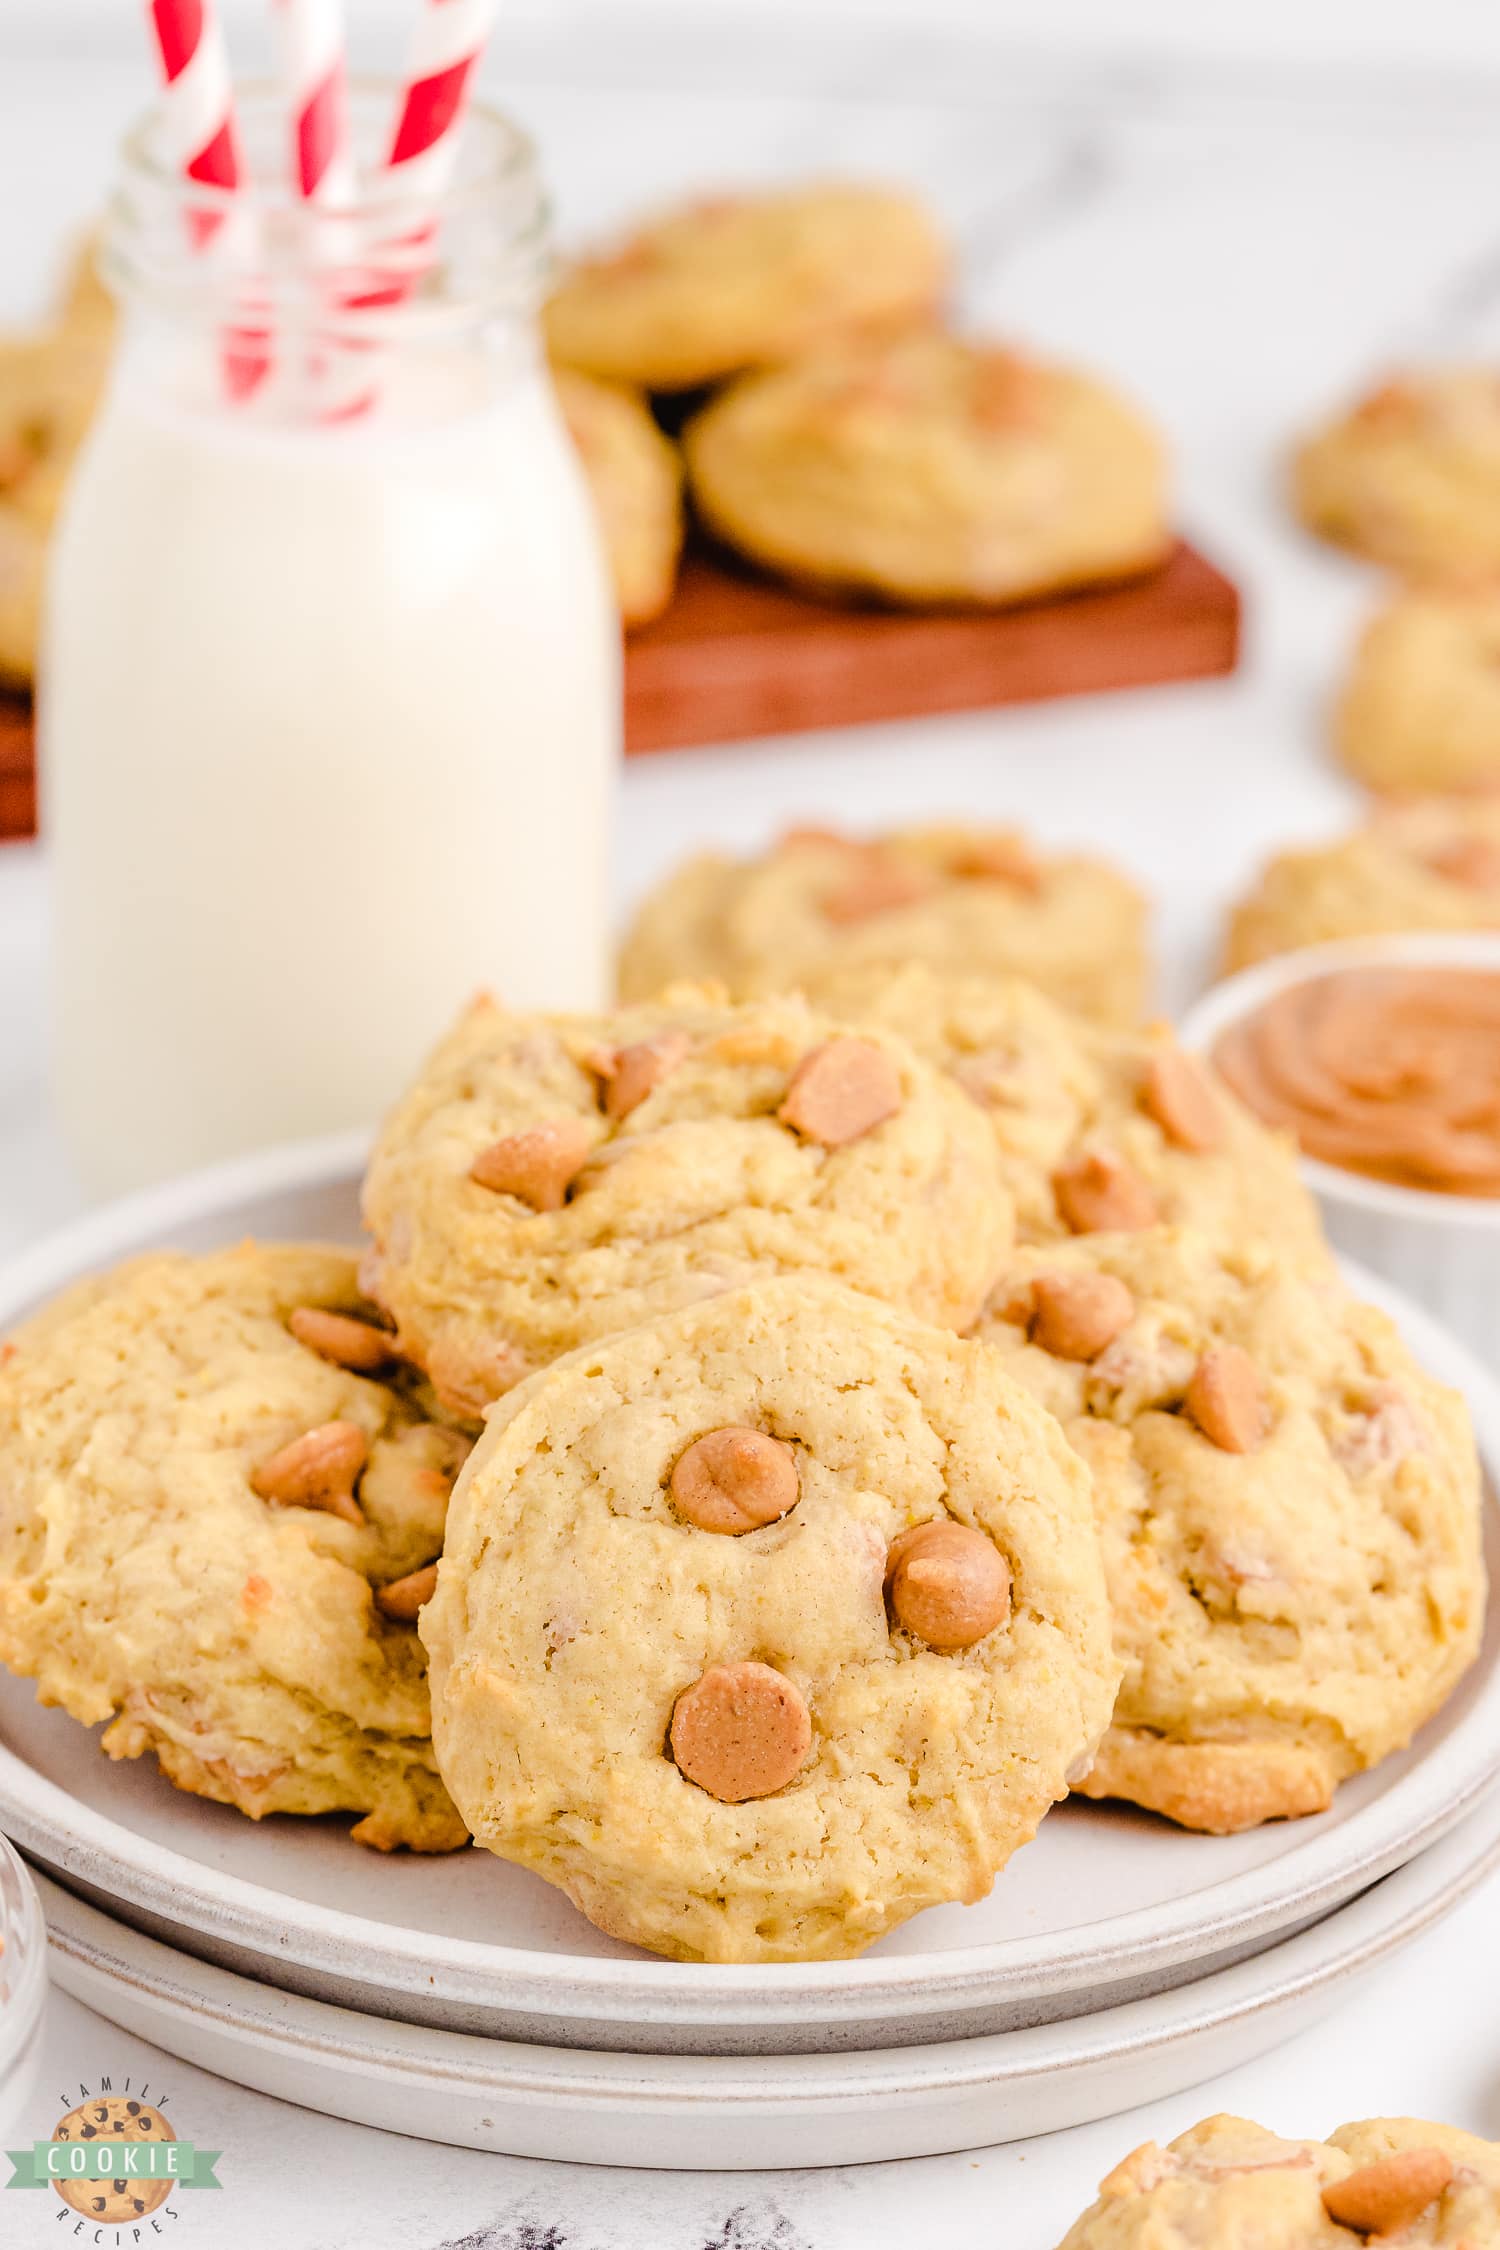 peanut butter banana cookies on a plate